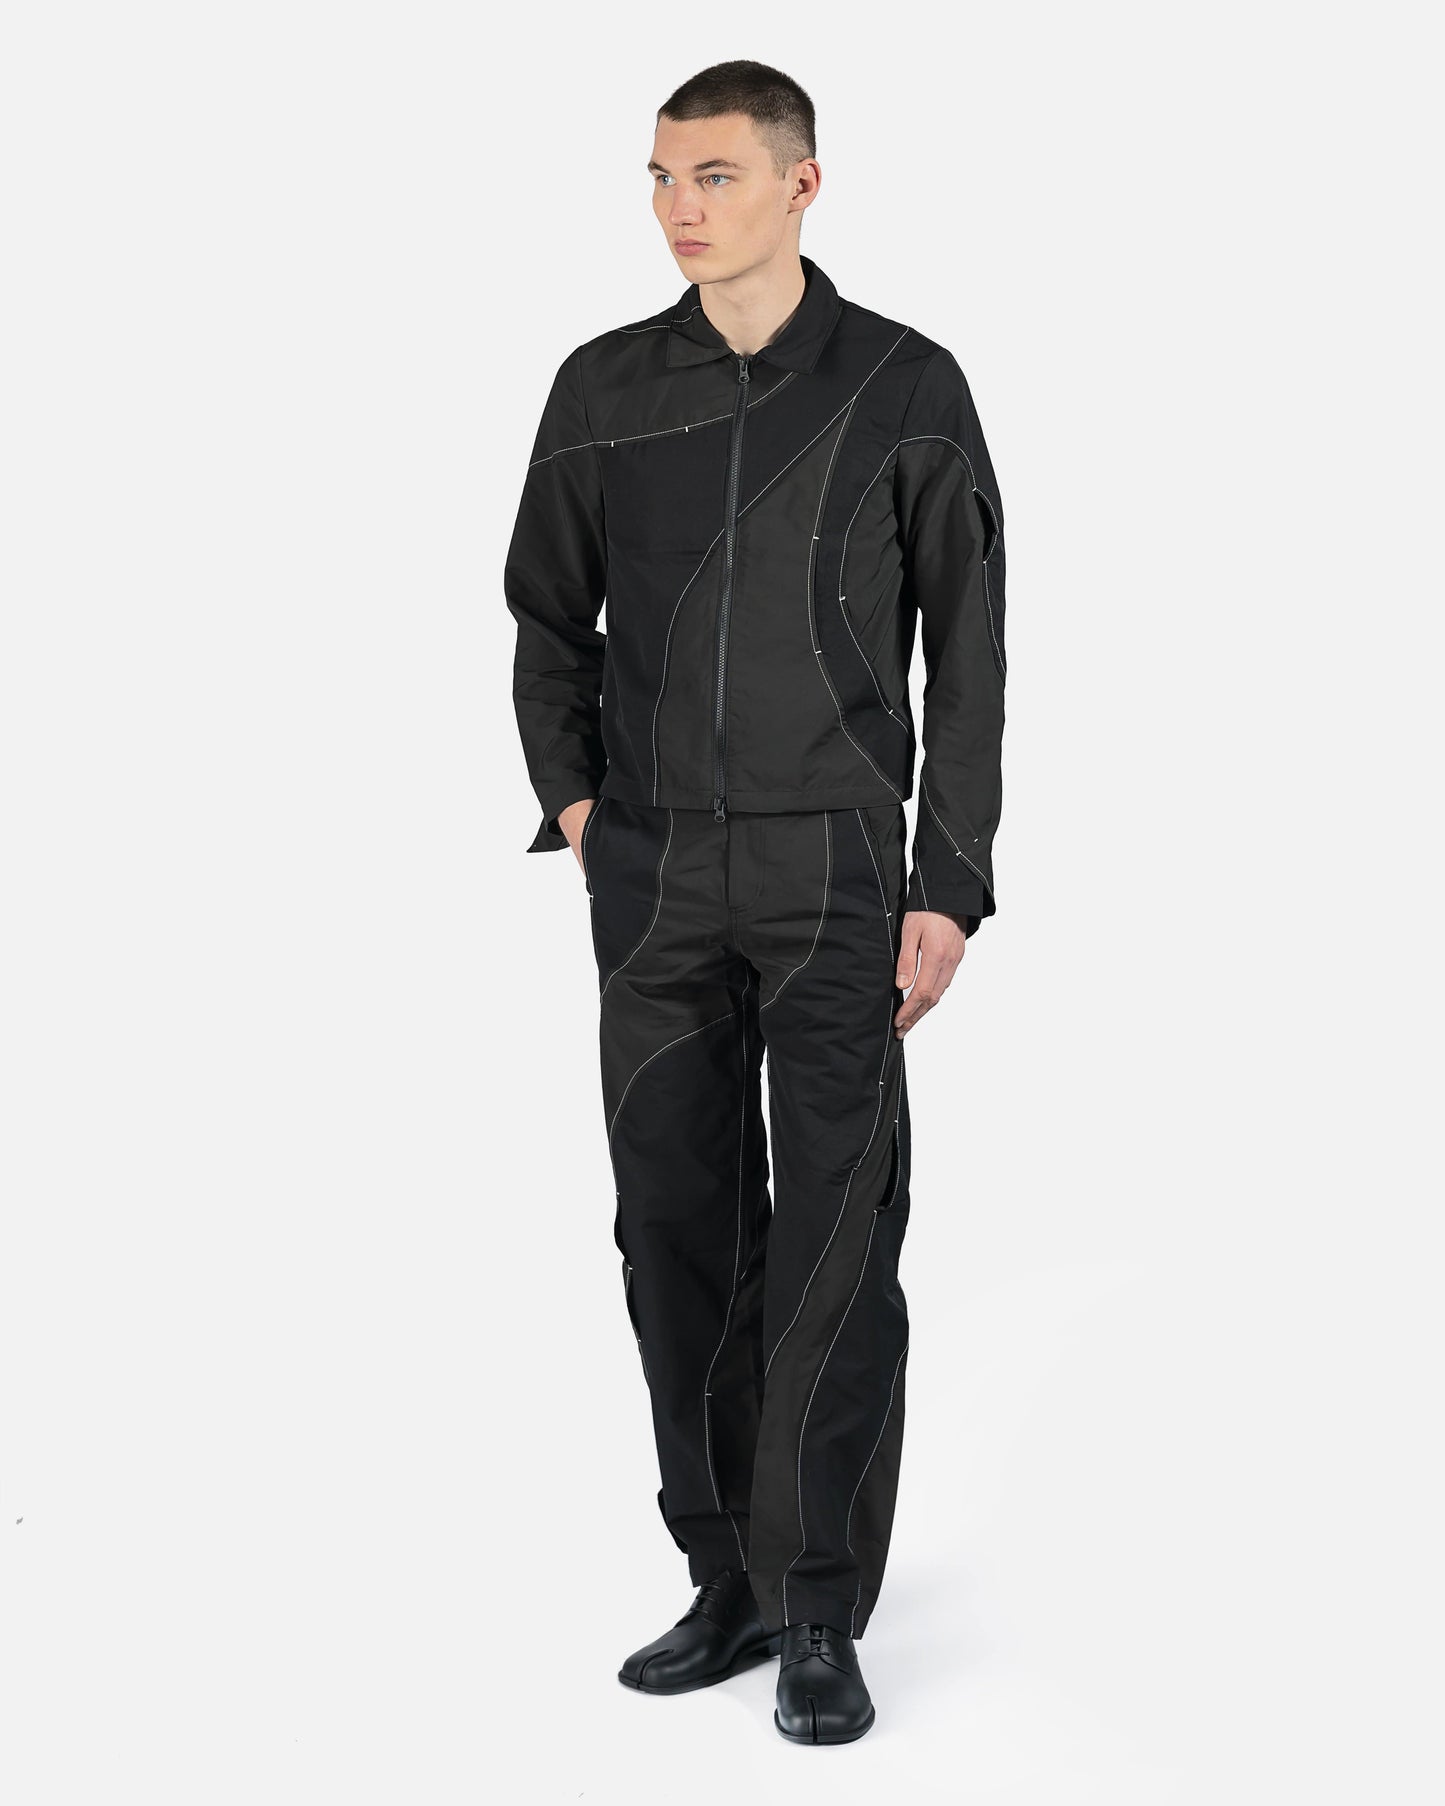 POST ARCHIVE FACTION (P.A.F) Men's Jackets 4.0+ Jacket Center in Black